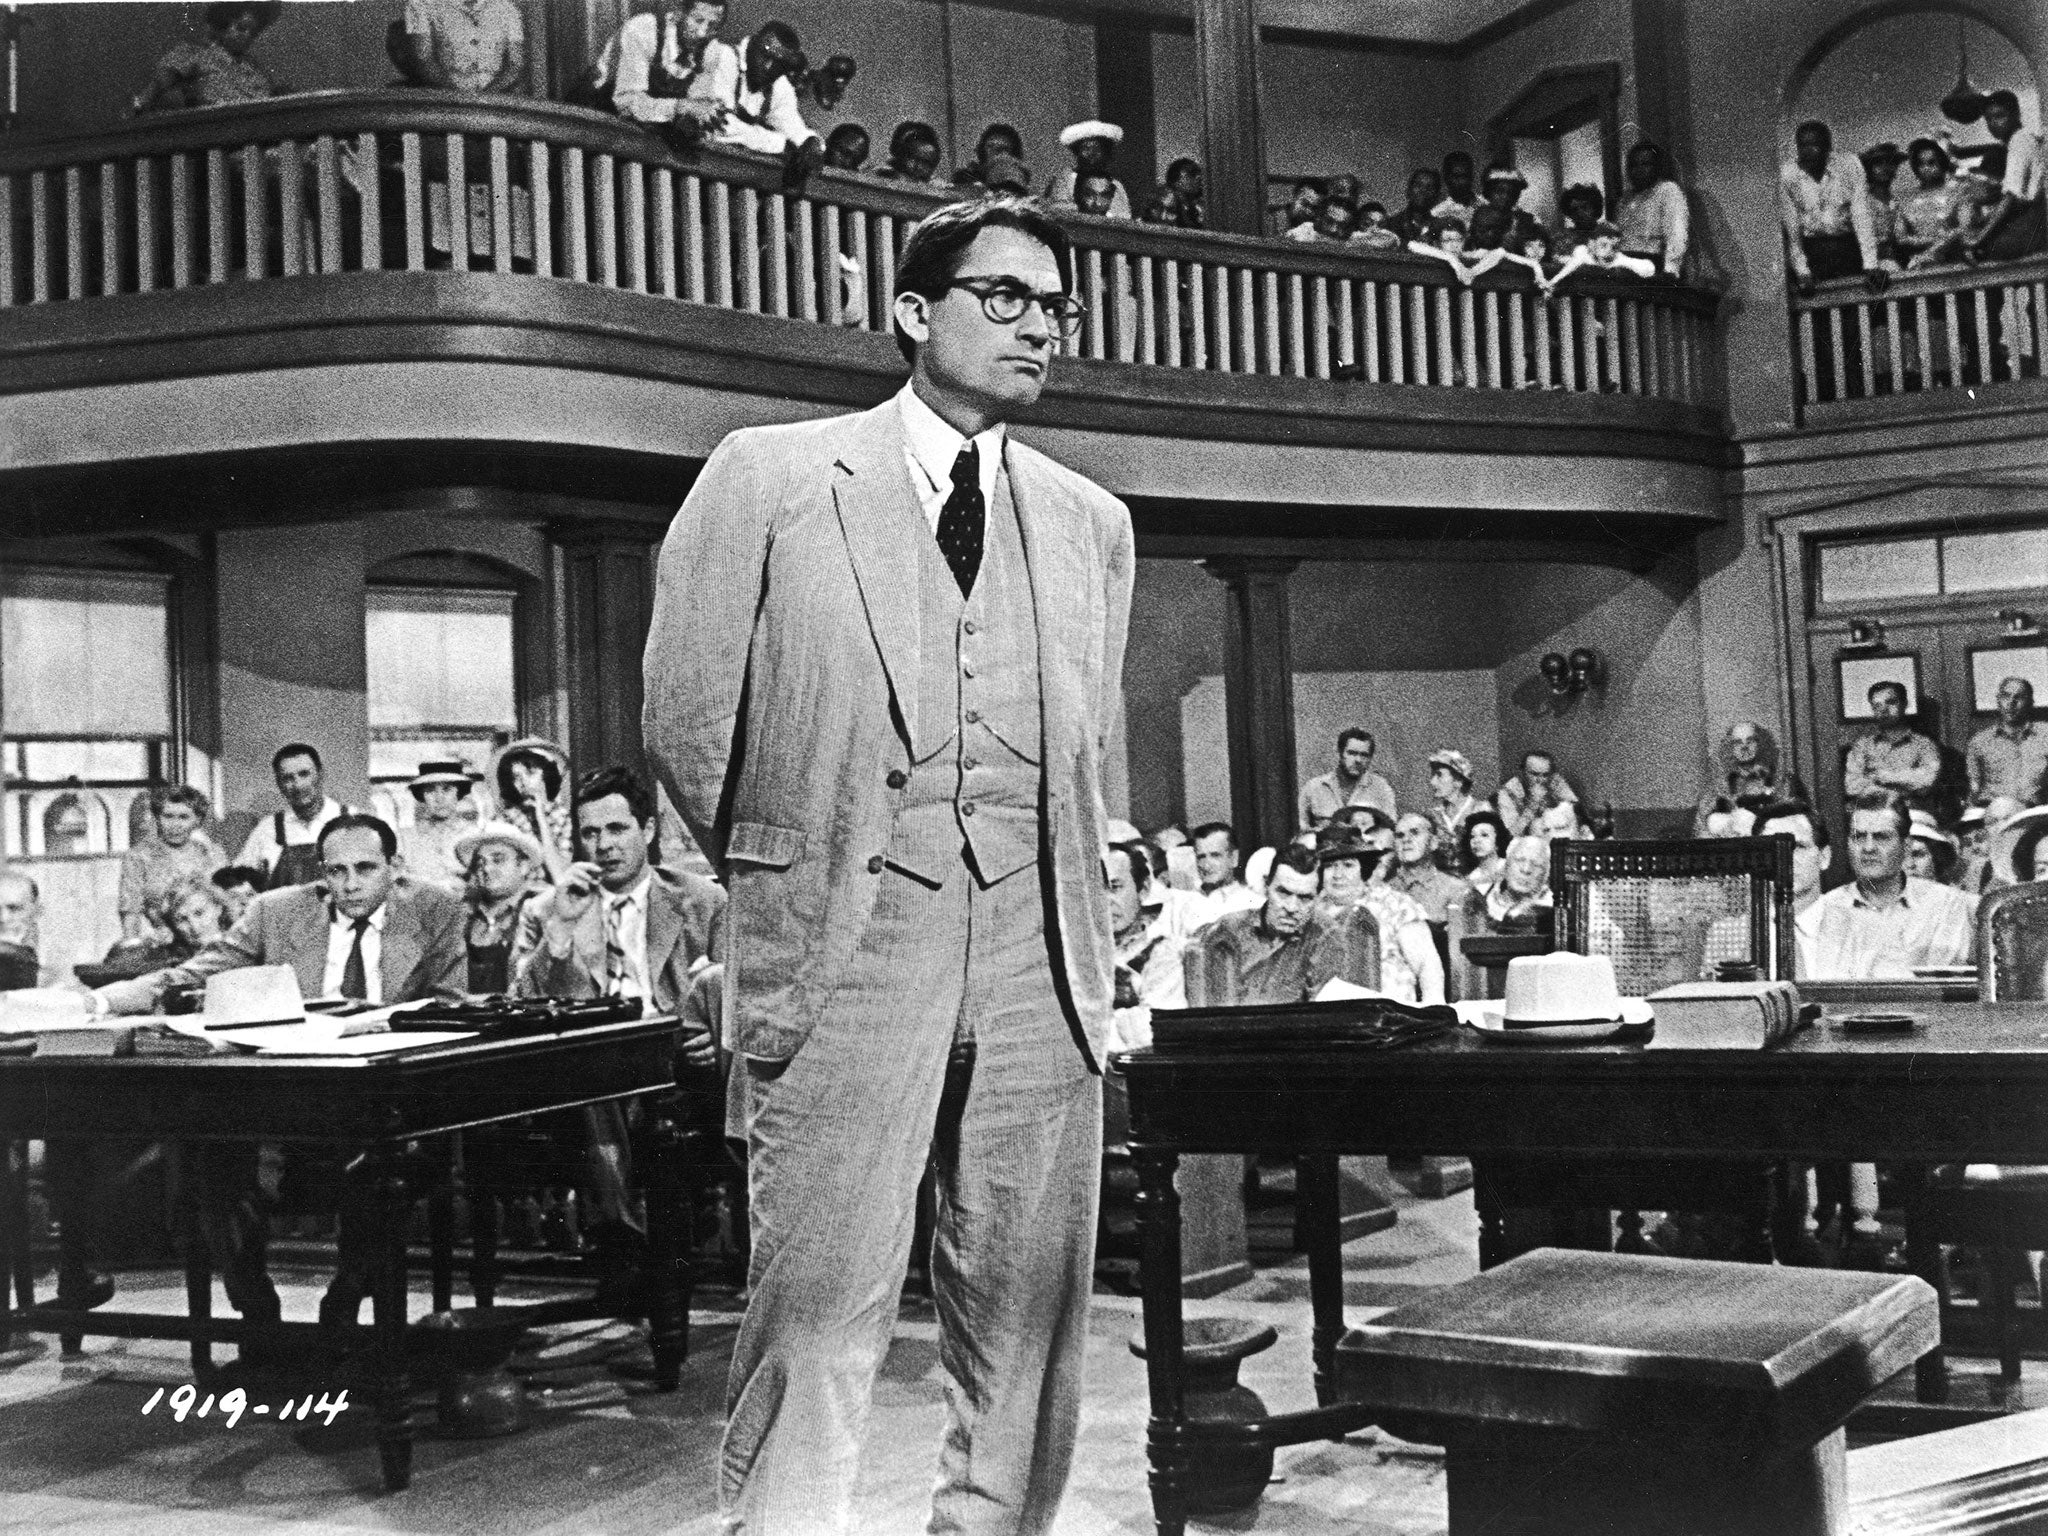 Gregory Peck as Atticus Finch in the 1962 film adaptation of Harper Lee’s ‘To Kill a Mockingbird’